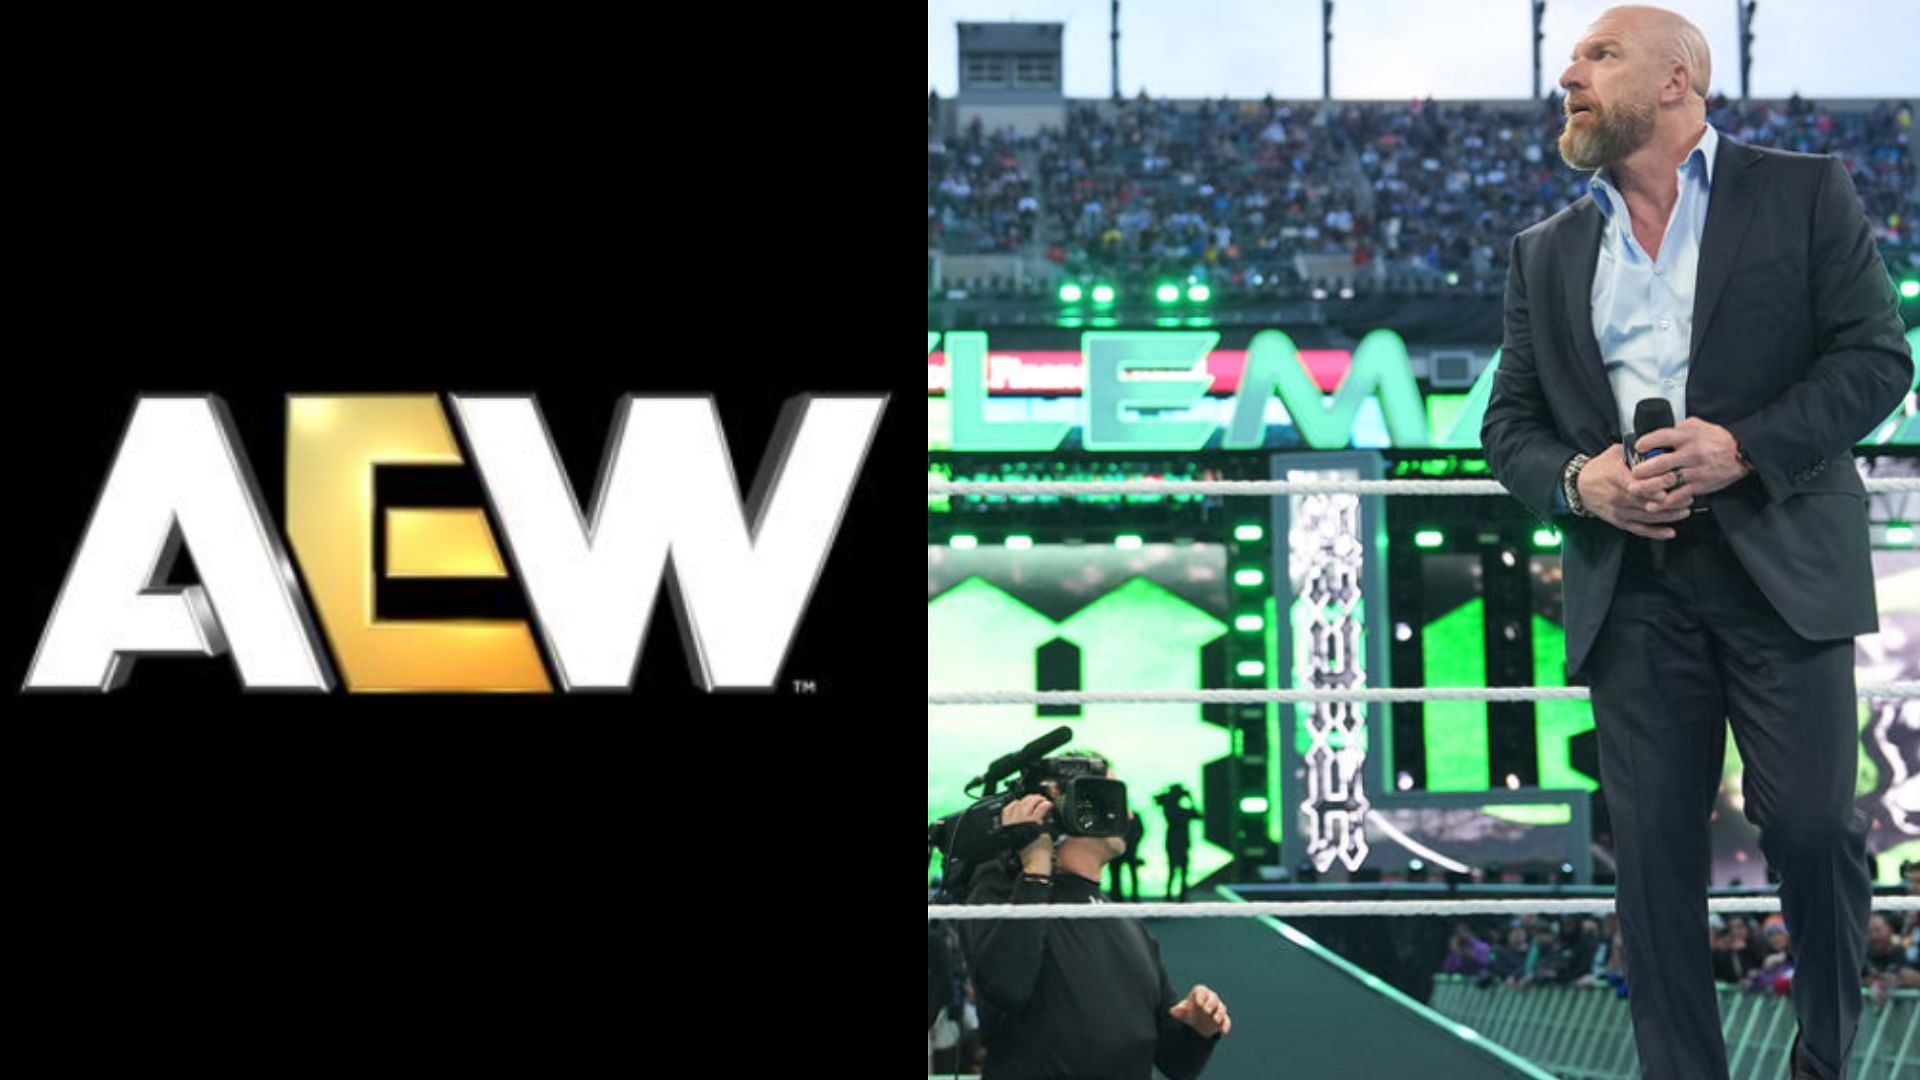 WrestleMania XL was the first WrestleMania of the Triple H era [Image Credits: WWE